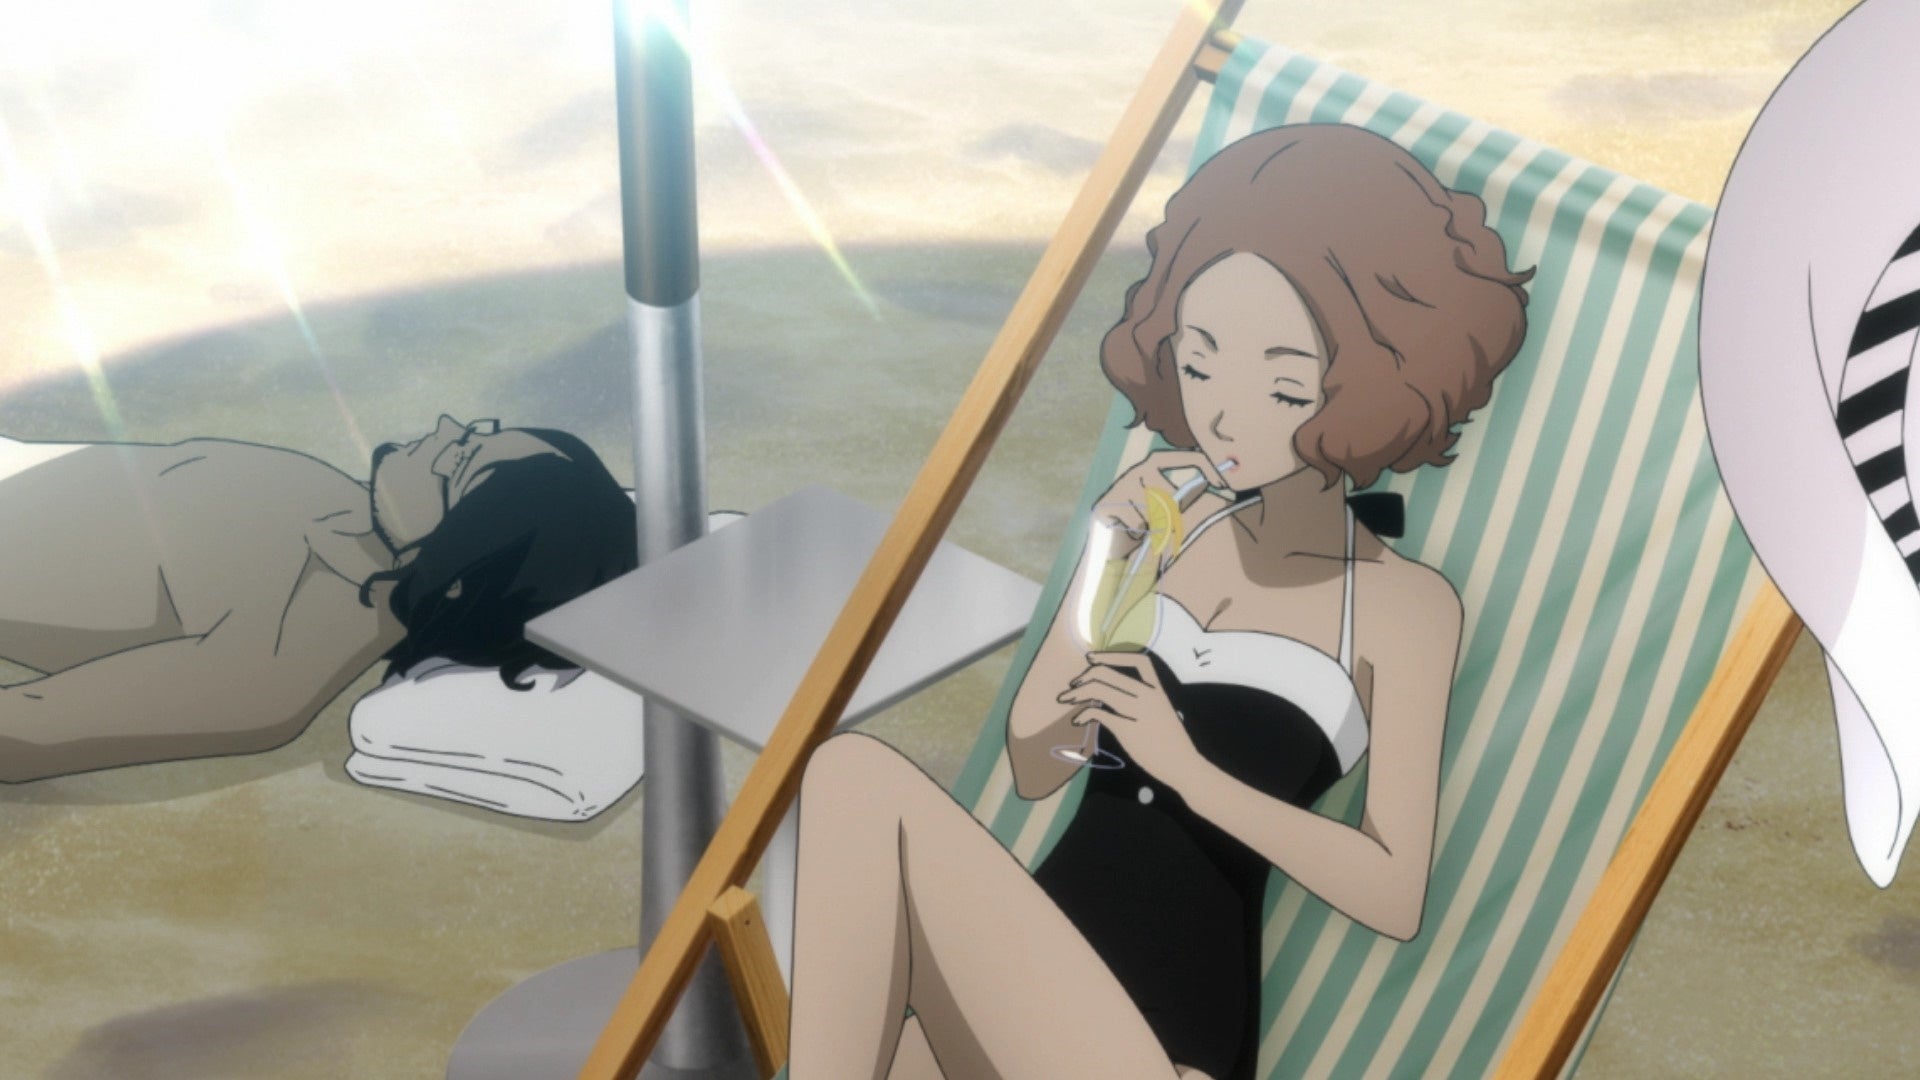 Haru relaxes on the beach in Persona 5 Strikers. Zenkichi is in the background.